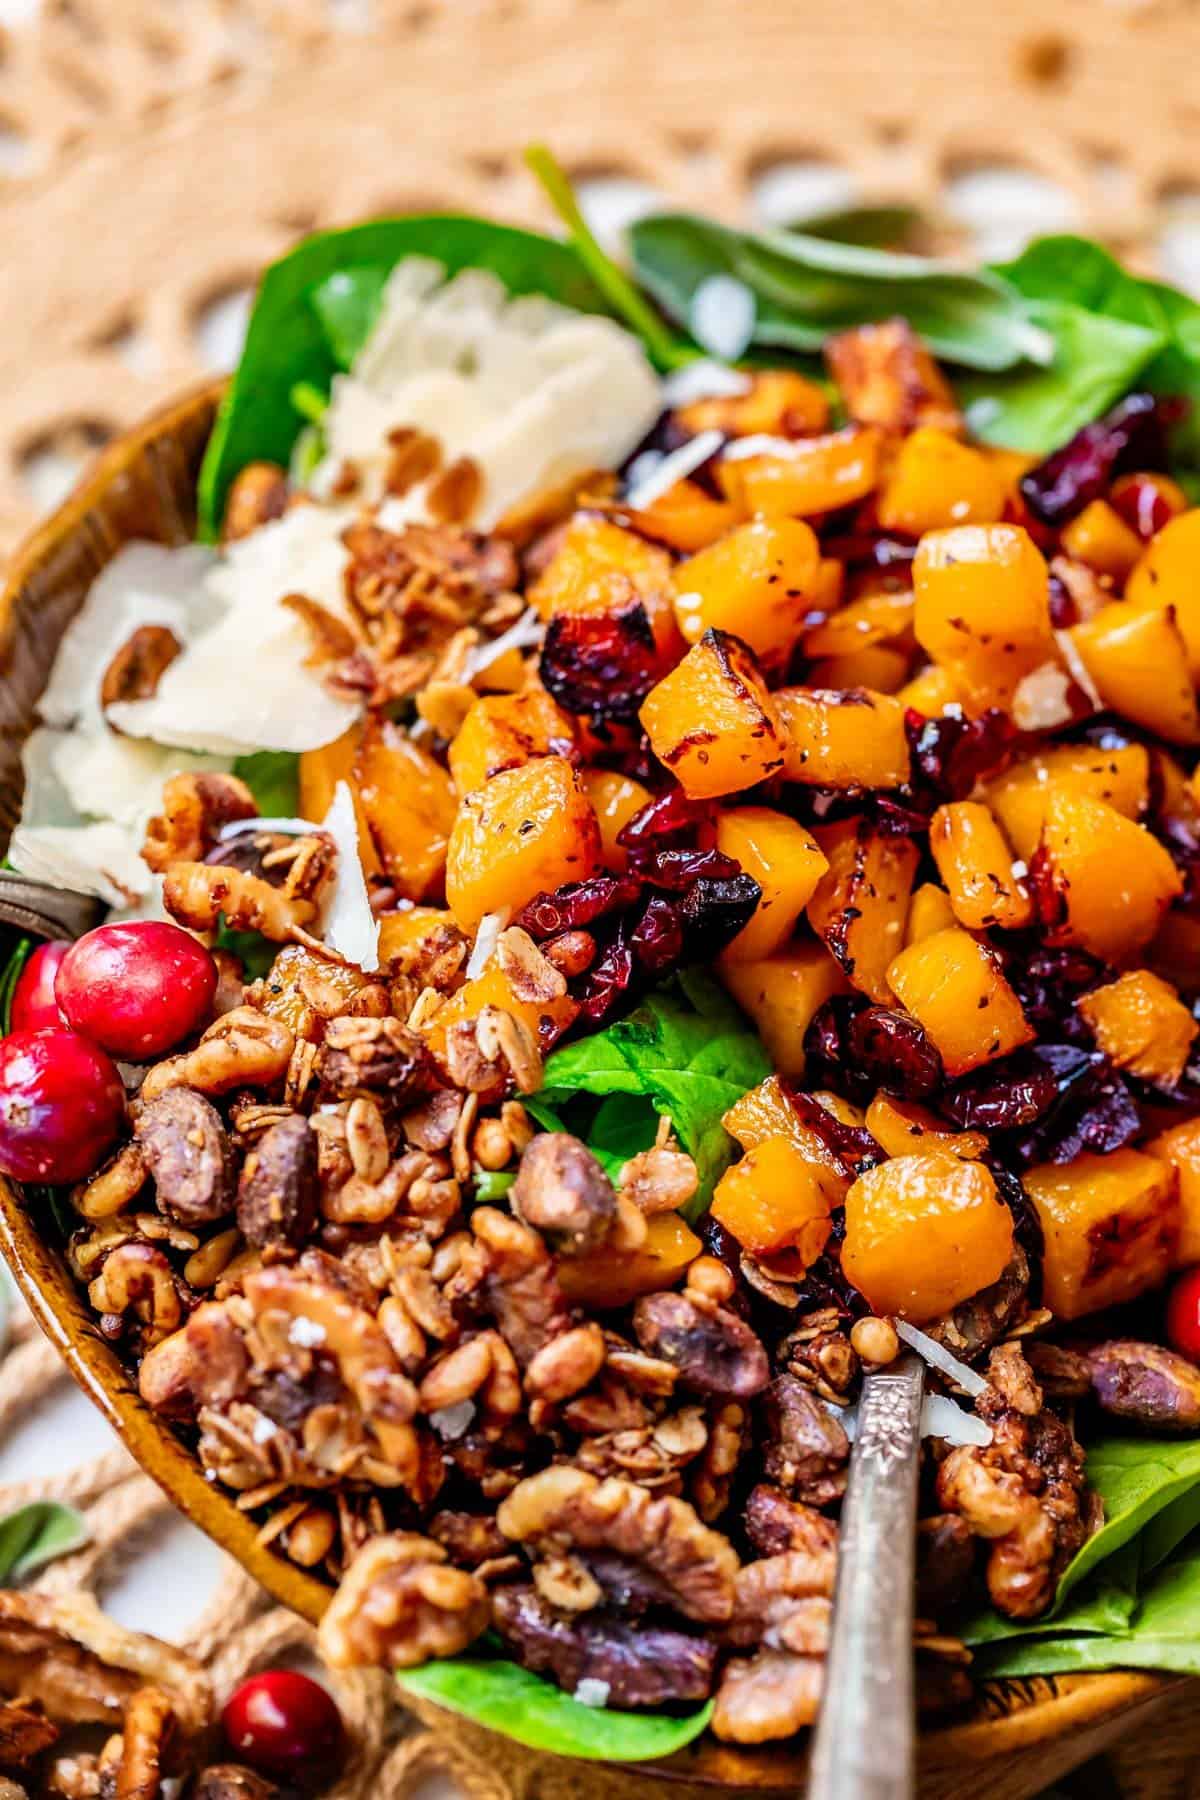 Roasted butternut squash salad in a wooden bowl with a spoon.